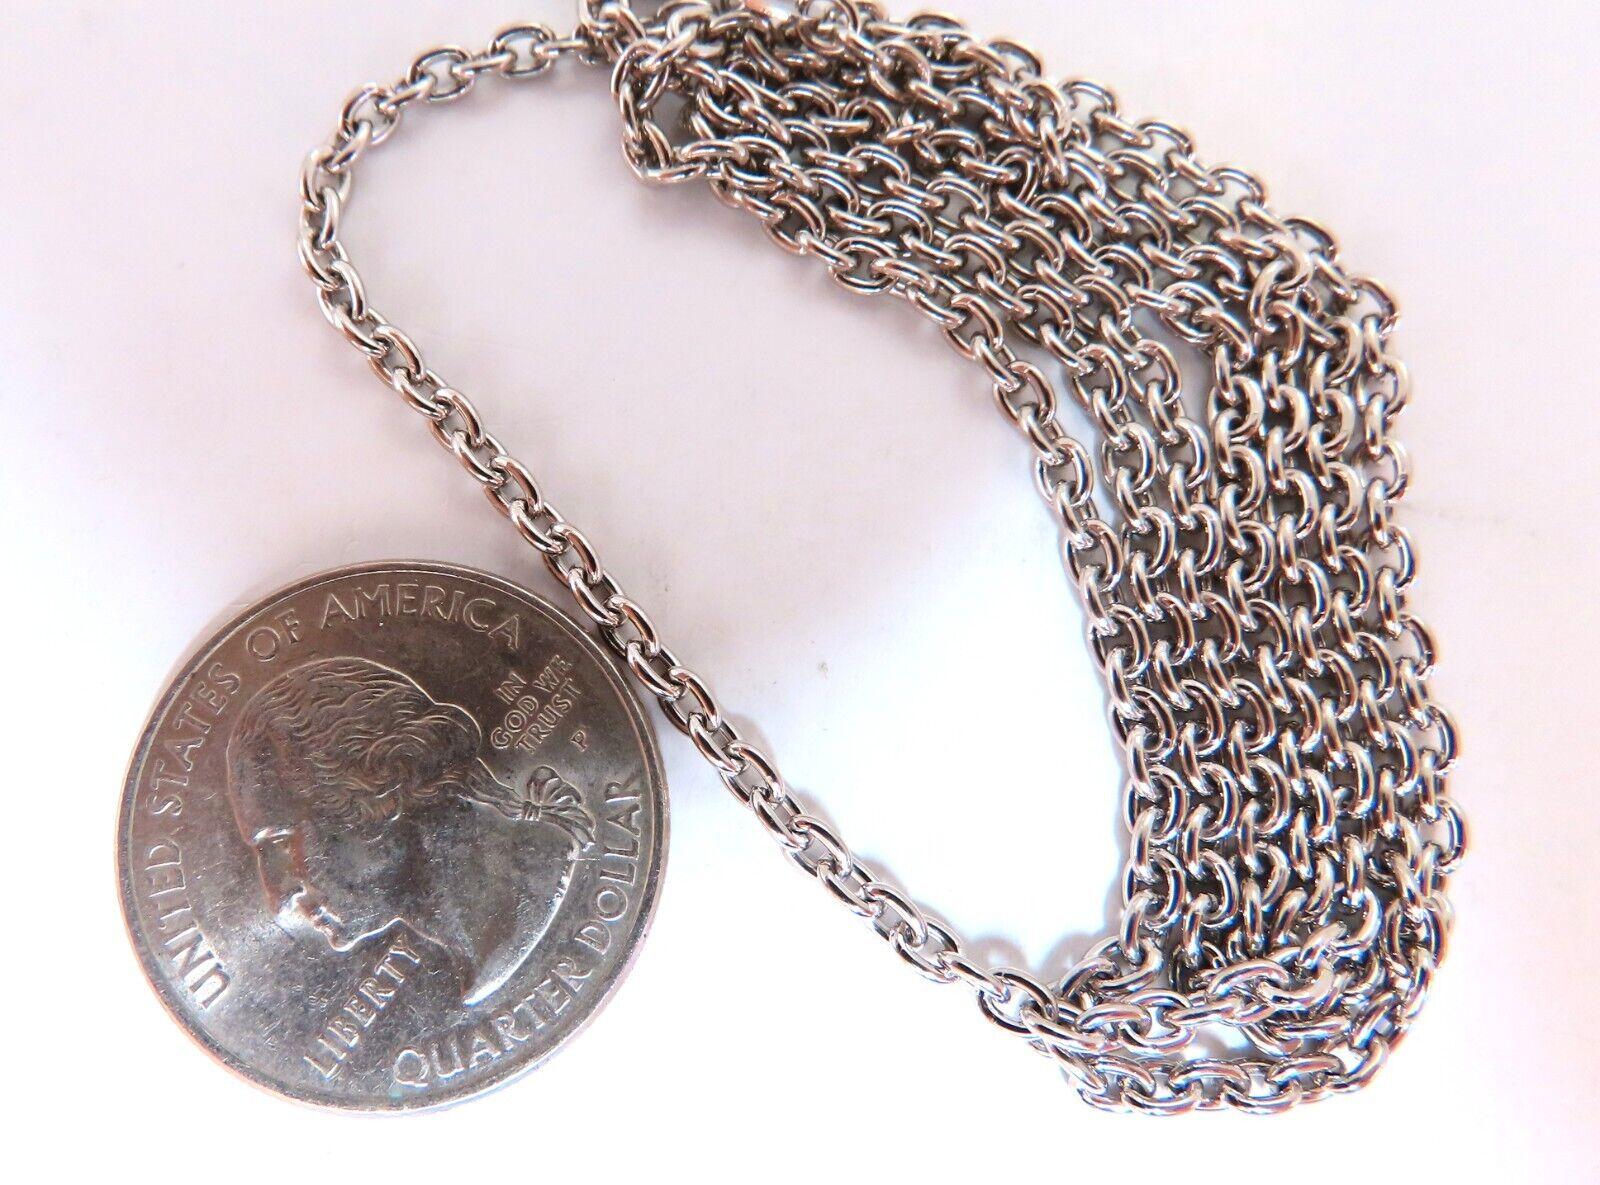 Classic cable link

2.7mm wide necklace.

platinum 

Chain measure 20 inches

Secure lock